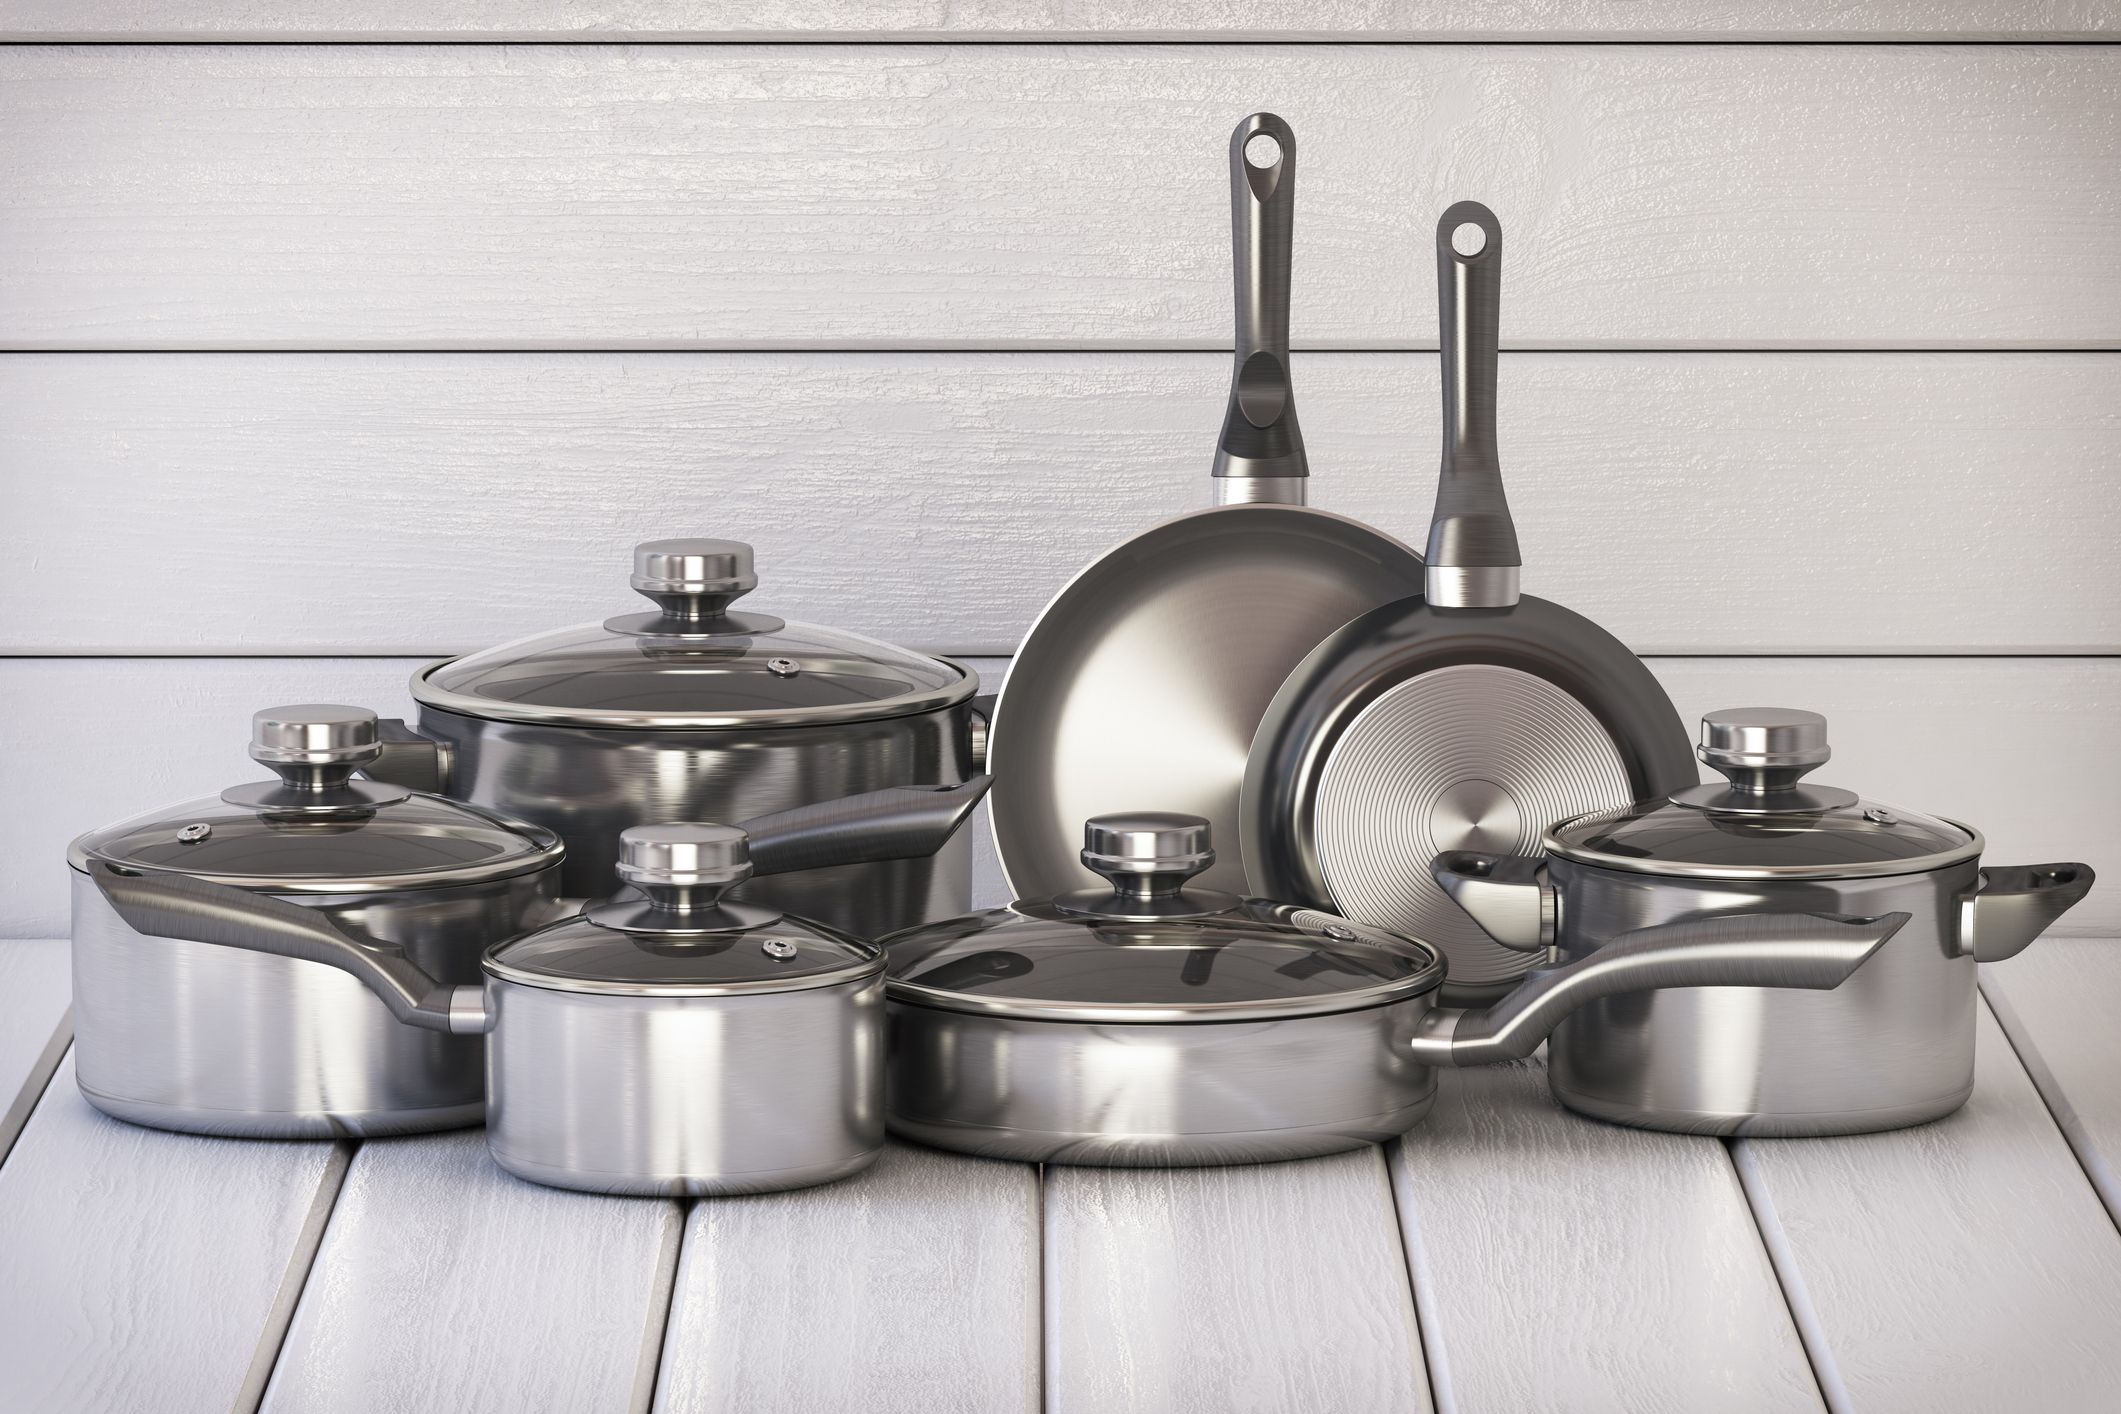 https://hips.hearstapps.com/hmg-prod/images/set-of-stainless-pots-and-pan-with-glass-lids-on-royalty-free-image-1573486021.jpg